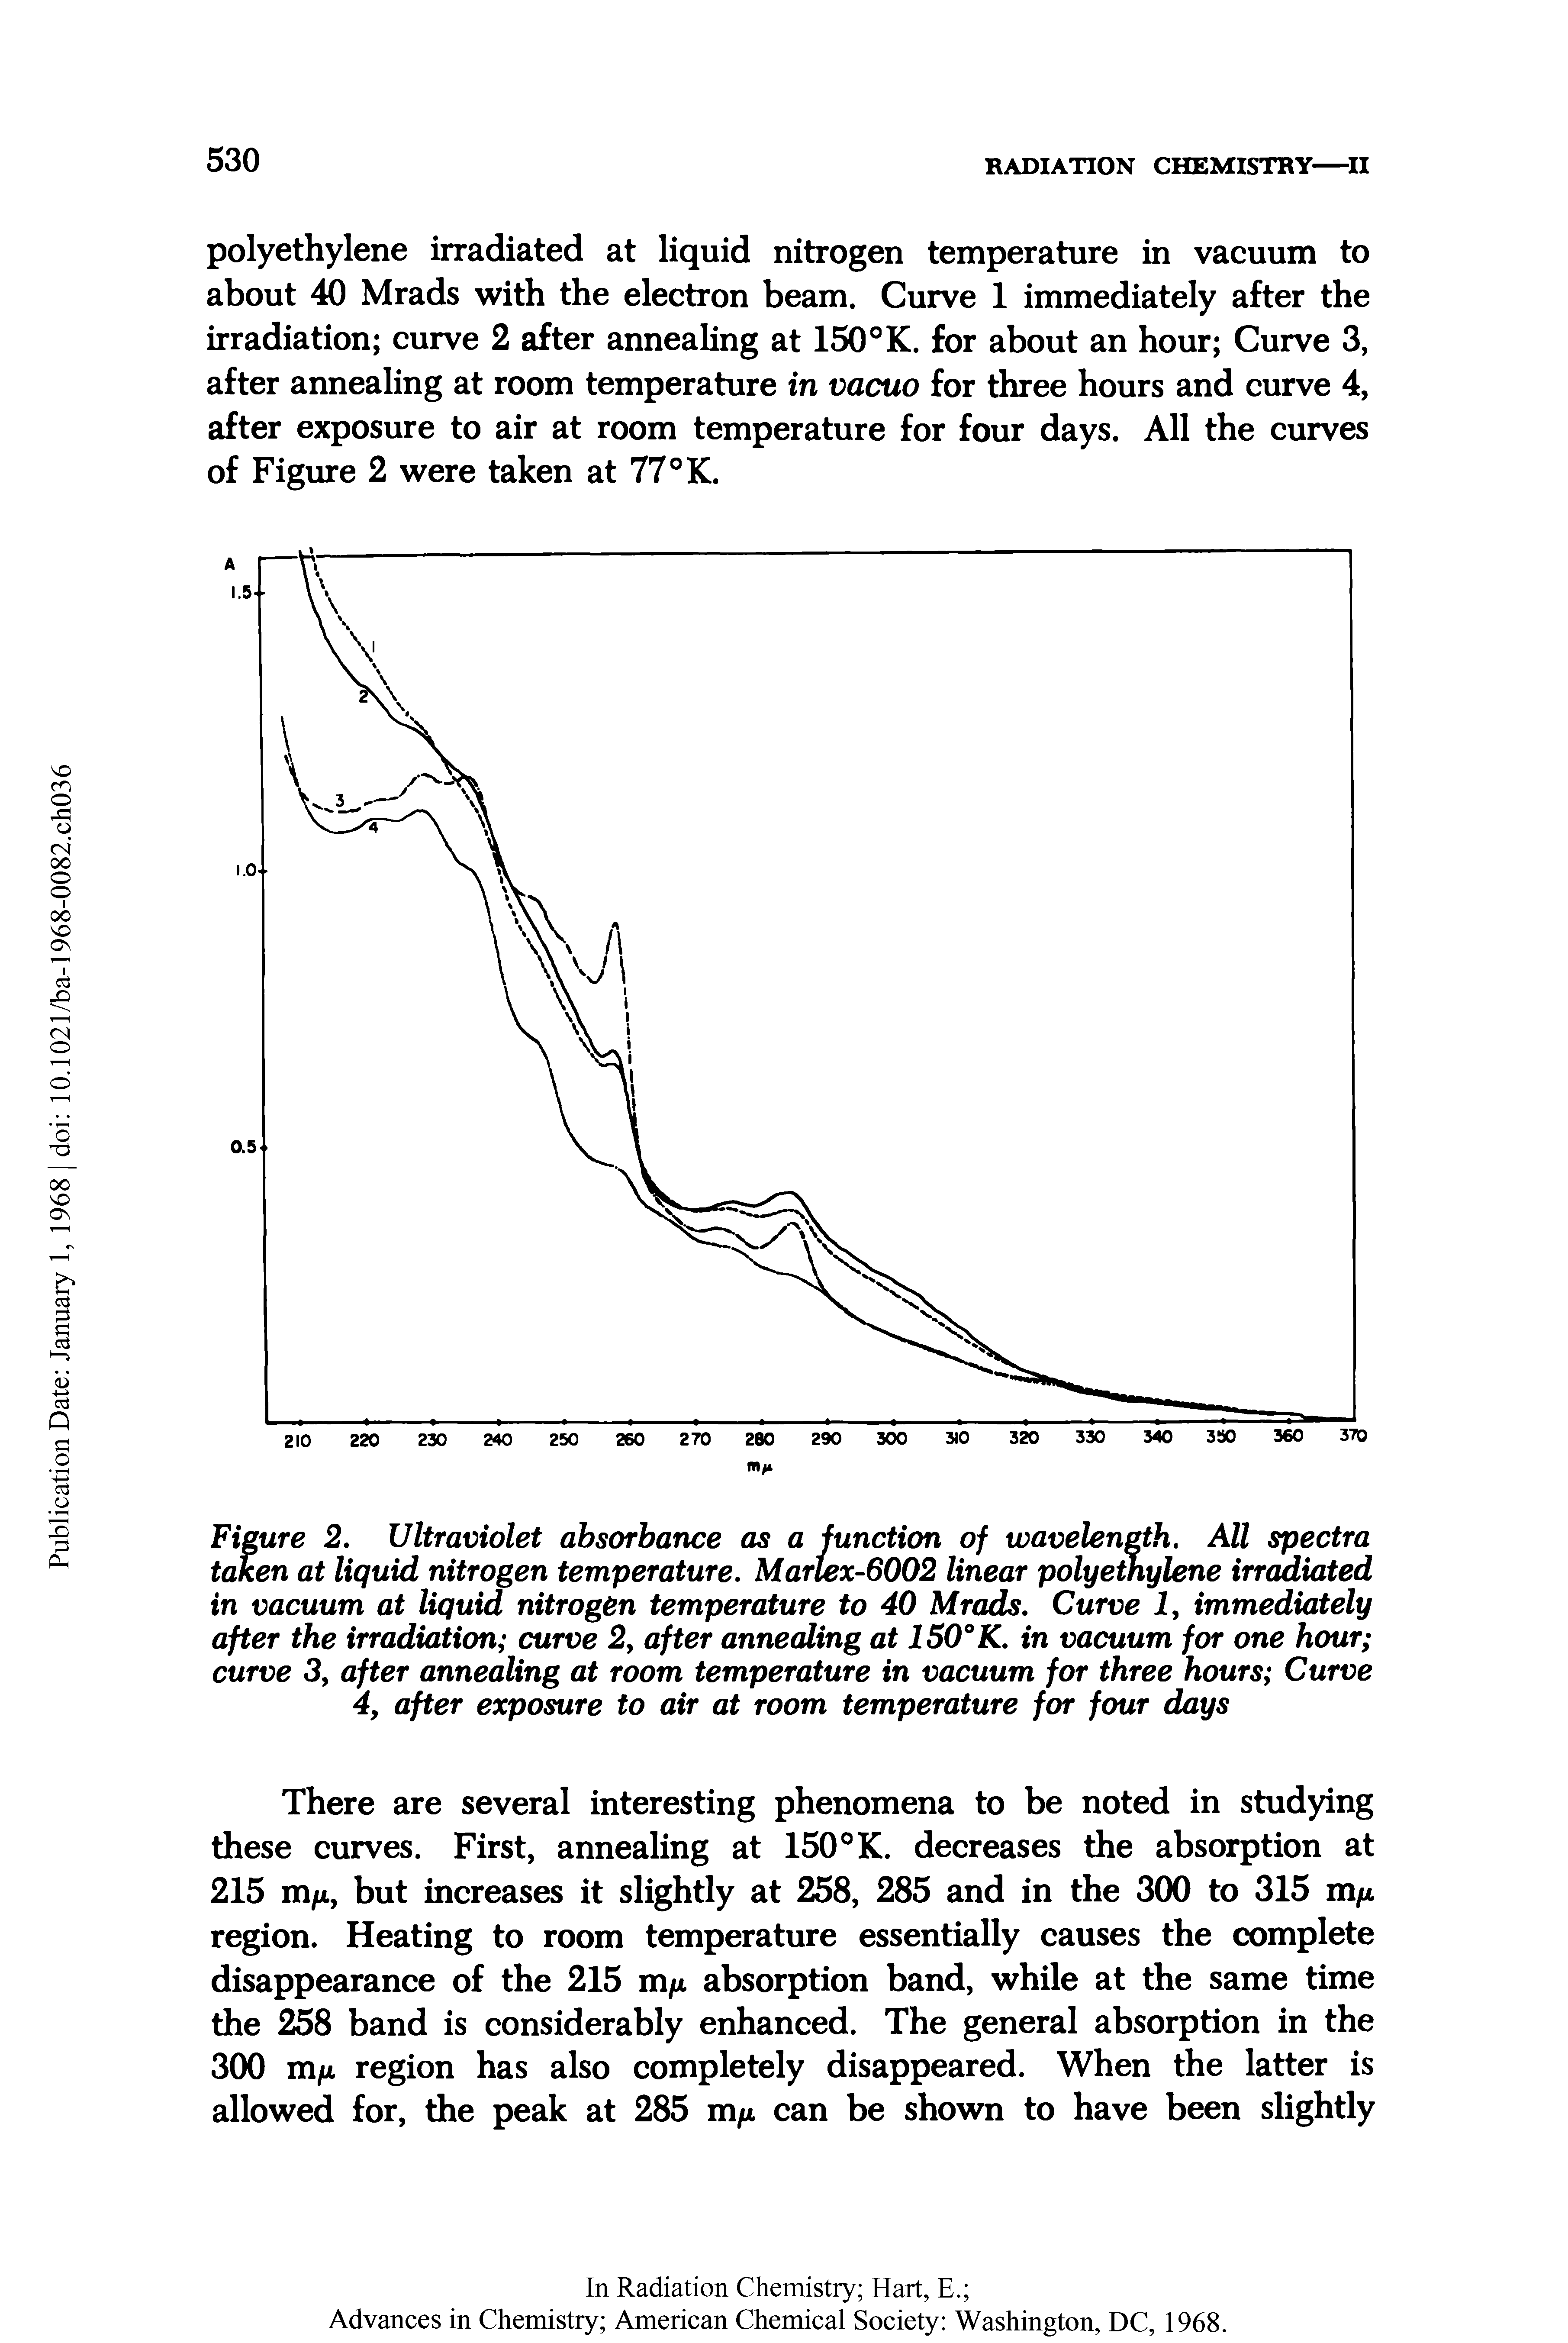 Figure 2. Ultraviolet absorbance as a function of wavelength. All spectra taken at liquid nitrogen temperature. Martex-6002 linear polyethylene irradiated in vacuum at liquid nitrogen temperature to 40 Mrads. Curve I, immediately after the irradiation curve 2, after annealing at 150°K. in vacuum for one hour curve 3, after annealing at room temperature in vacuum for three hours Curve 4, after exposure to air at room temperature for four days...